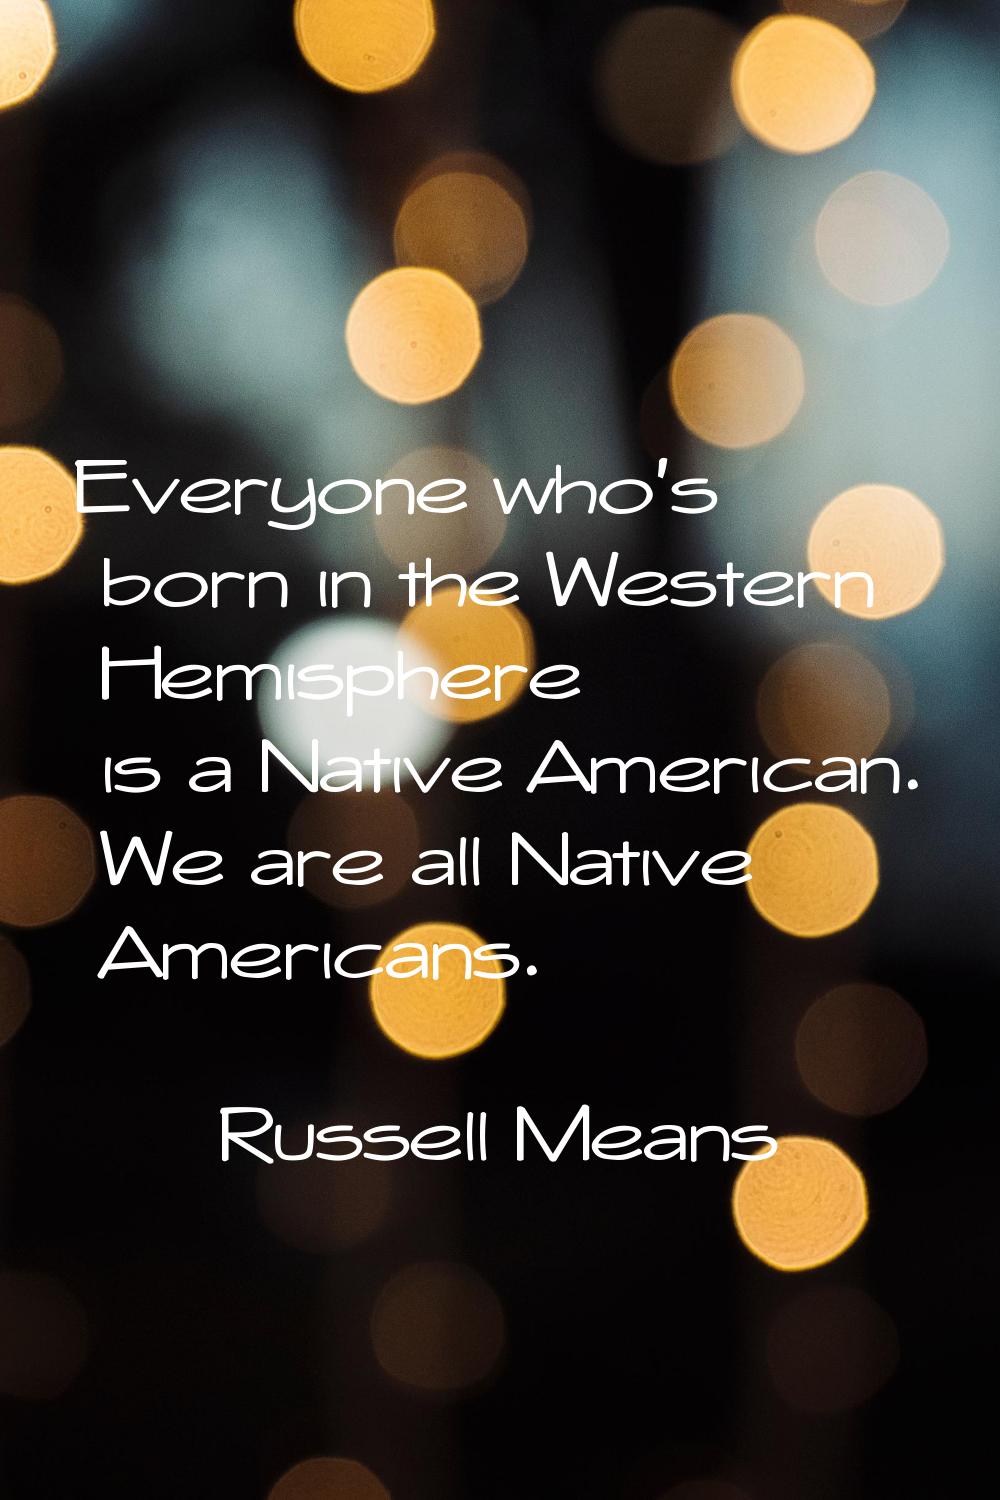 Everyone who's born in the Western Hemisphere is a Native American. We are all Native Americans.